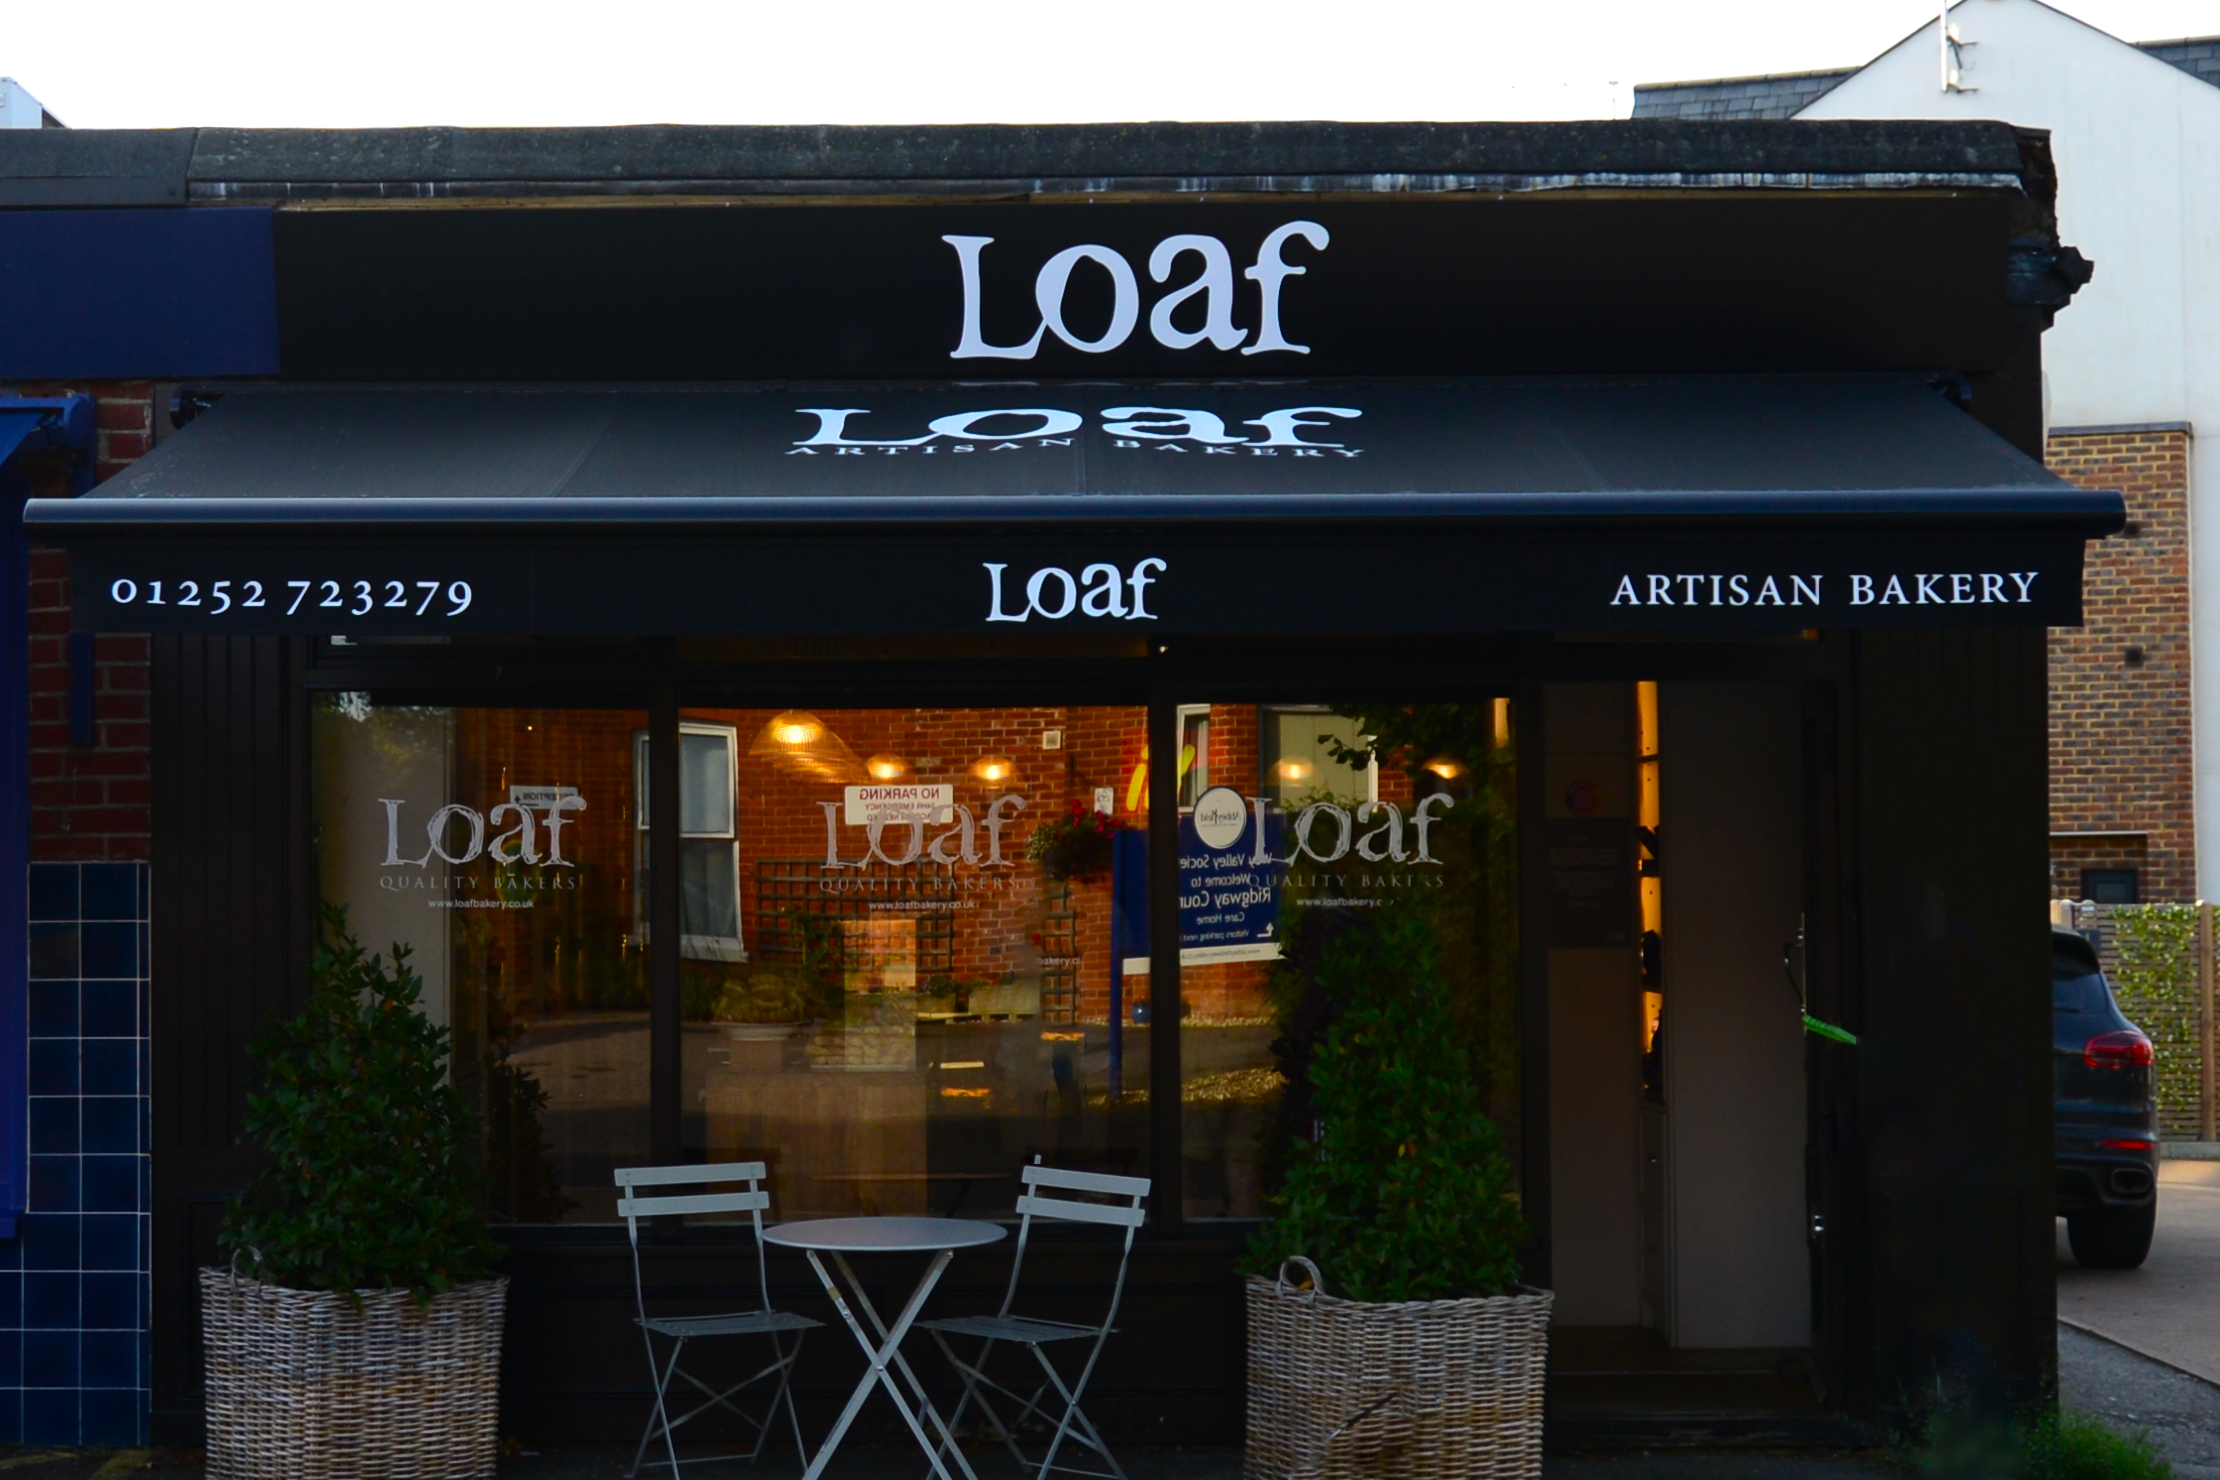 Black branded awning for a bakery in Farnham, sheltering the shop front and al fresco seating area